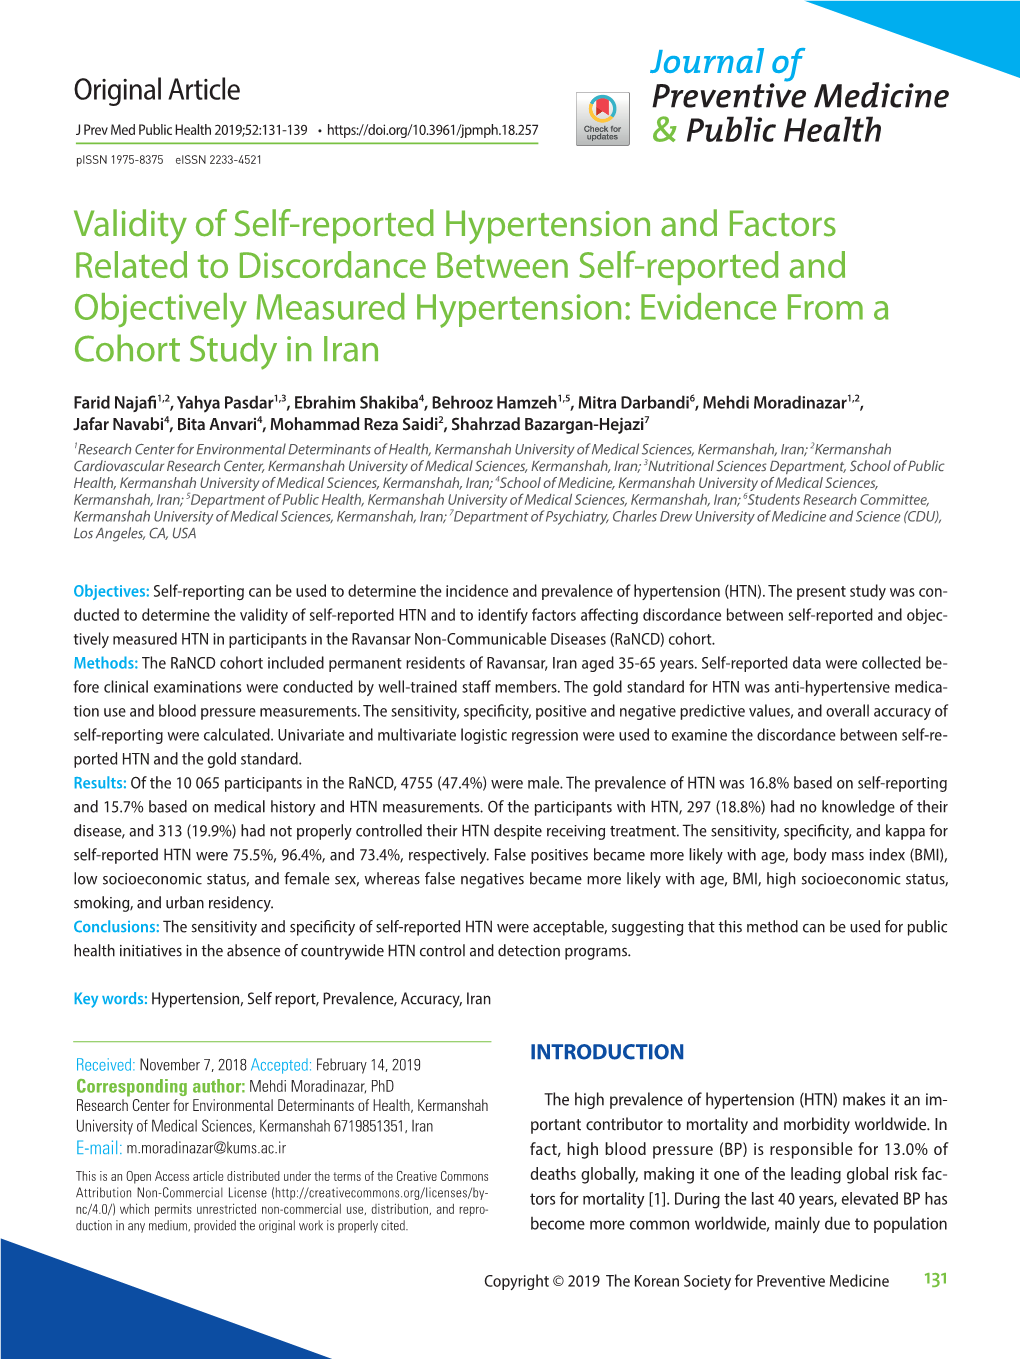 Validity of Self-Reported Hypertension and Factors Related to Discordance